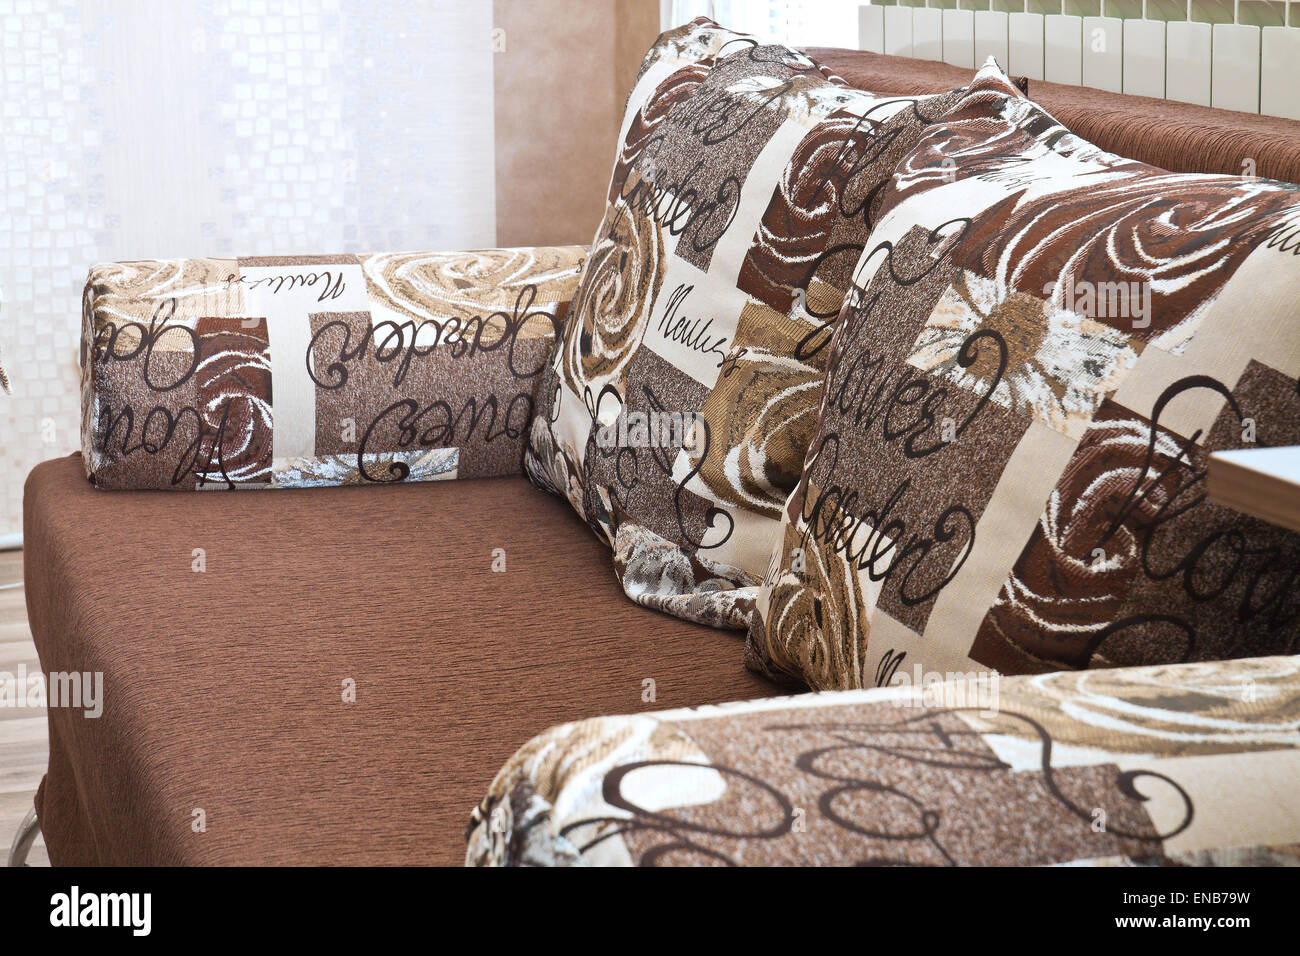 Detail from home sofa with pillows in beige brown tones Stock Photo